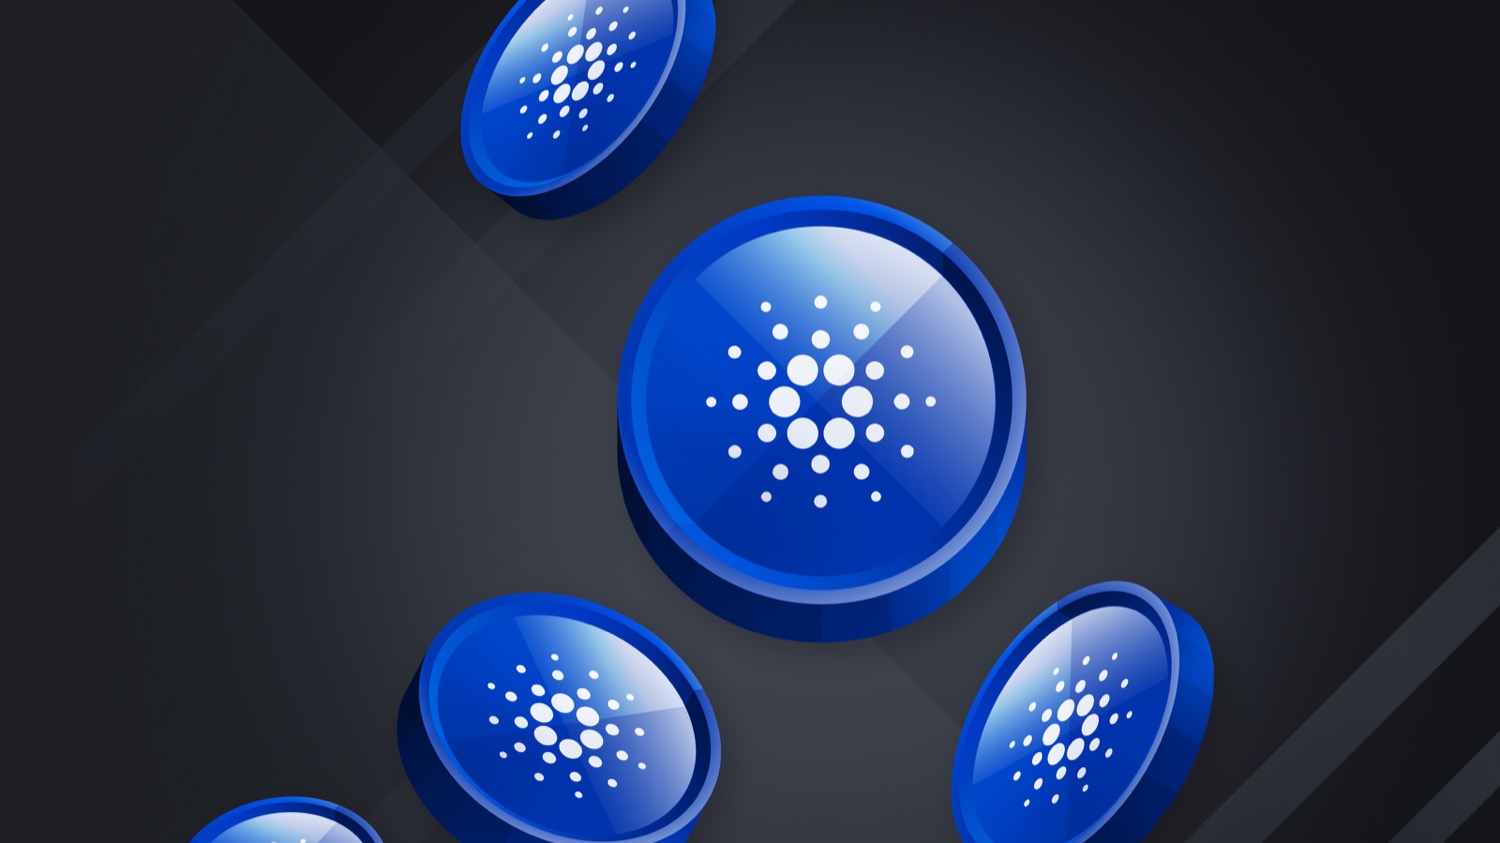 All About Cardano (ADA)